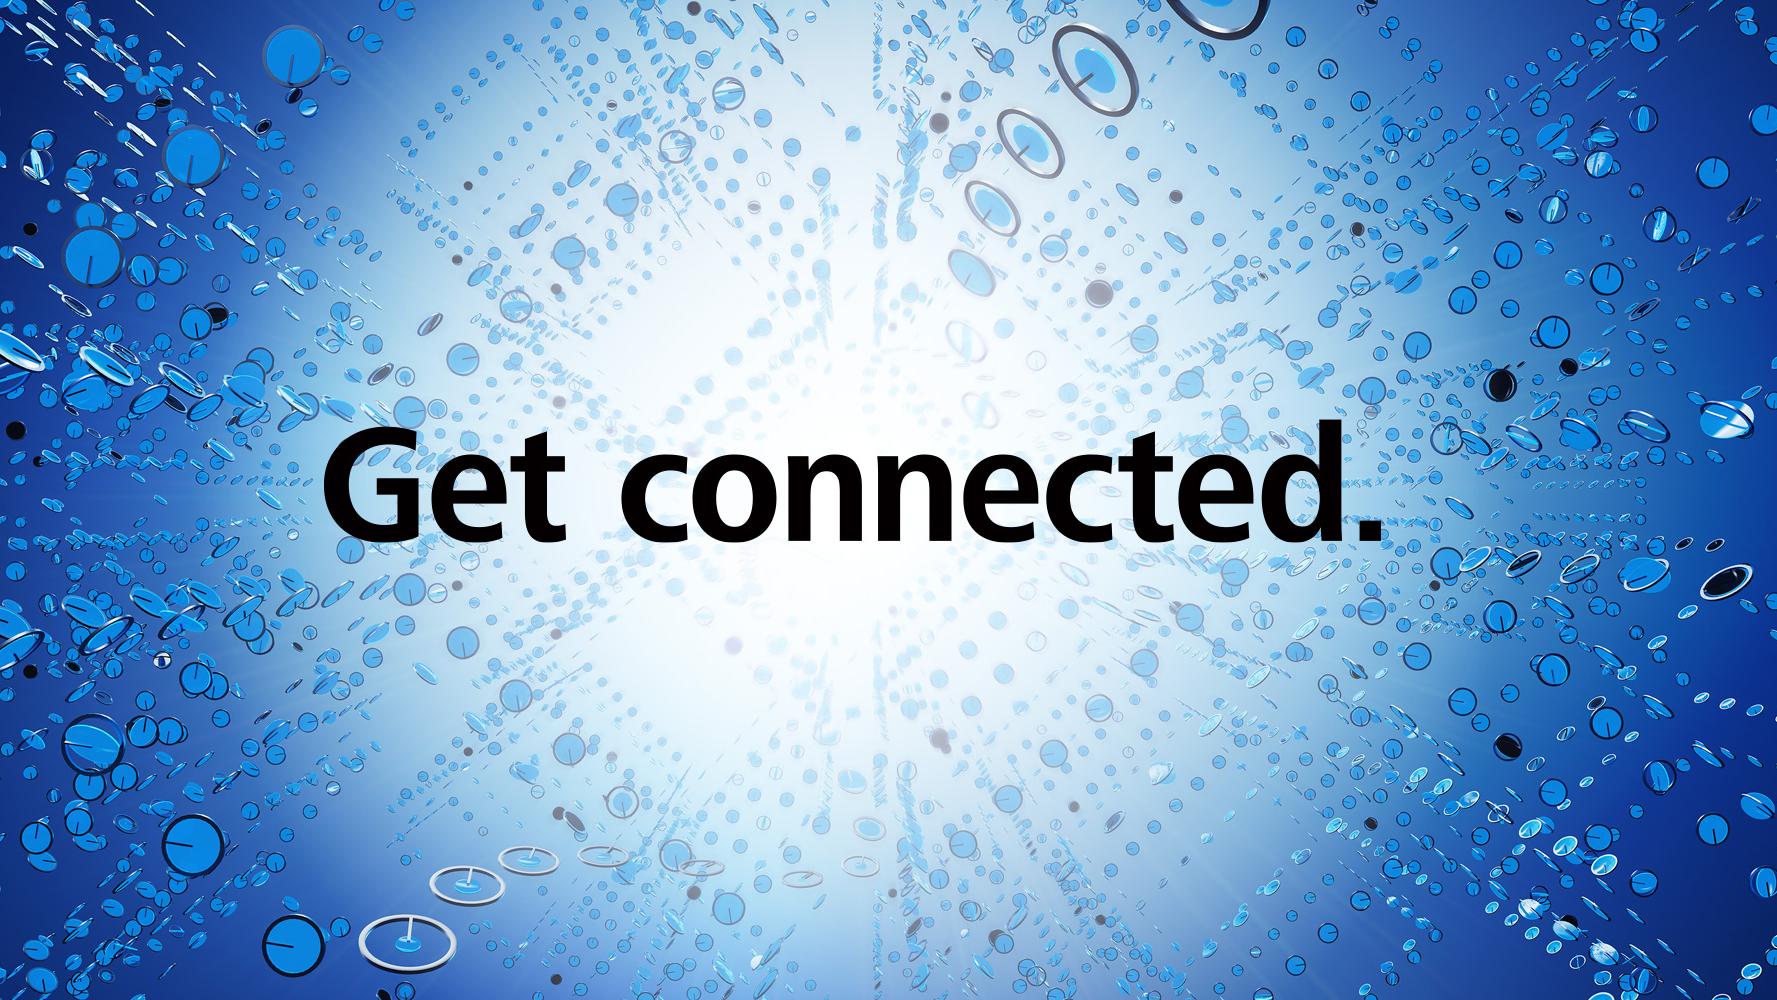 Illustration of Get Connected